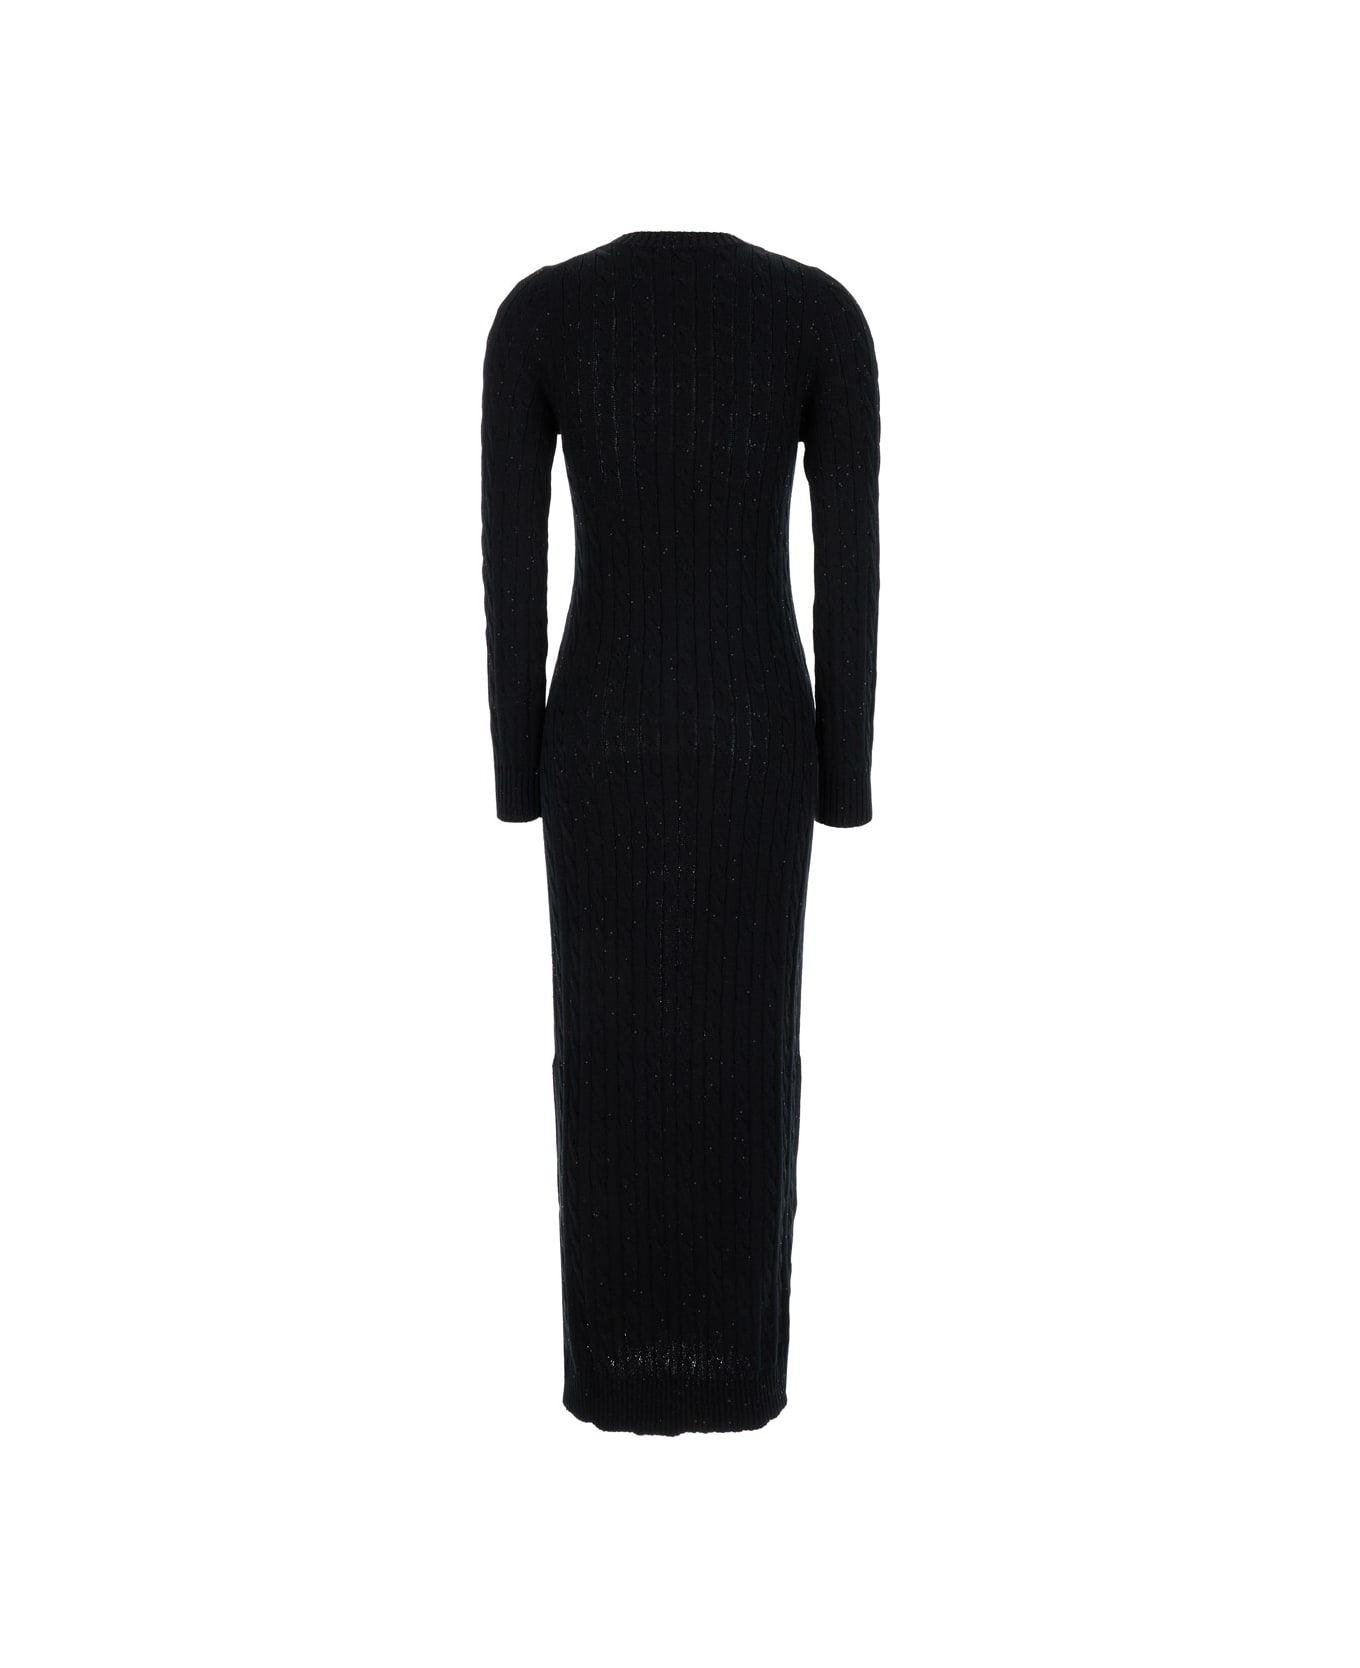 Brunello Cucinelli Black Sequin Embellished Cable Knit Dress In Cotton Blend Woman - Black ワンピース＆ドレス